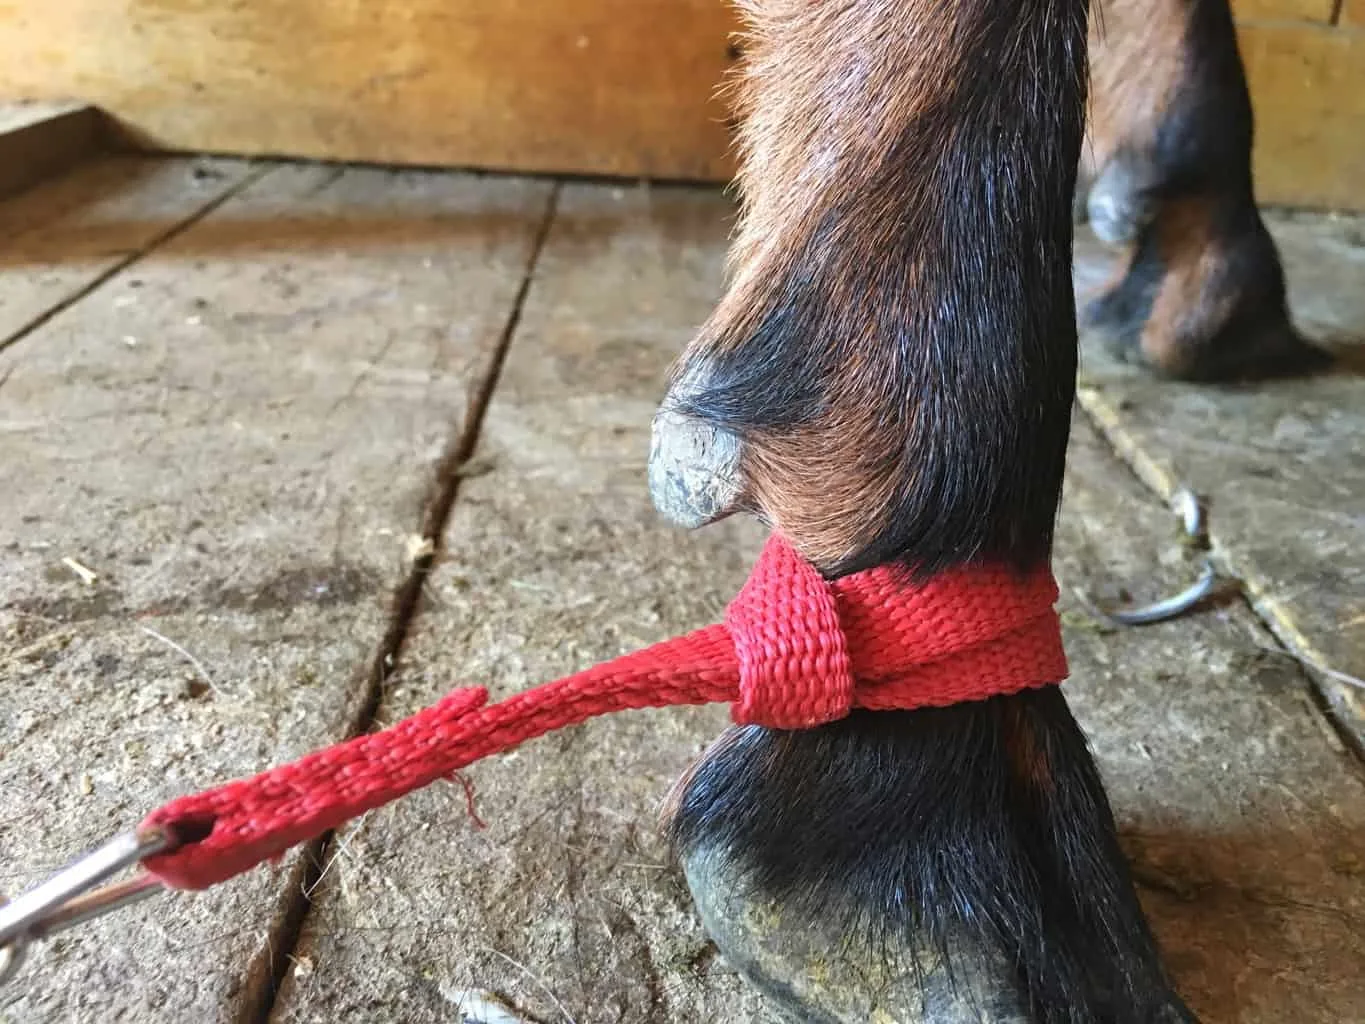 This picture shows how a leash can be put around a goat's leg to aid in milking and training new goats to milk